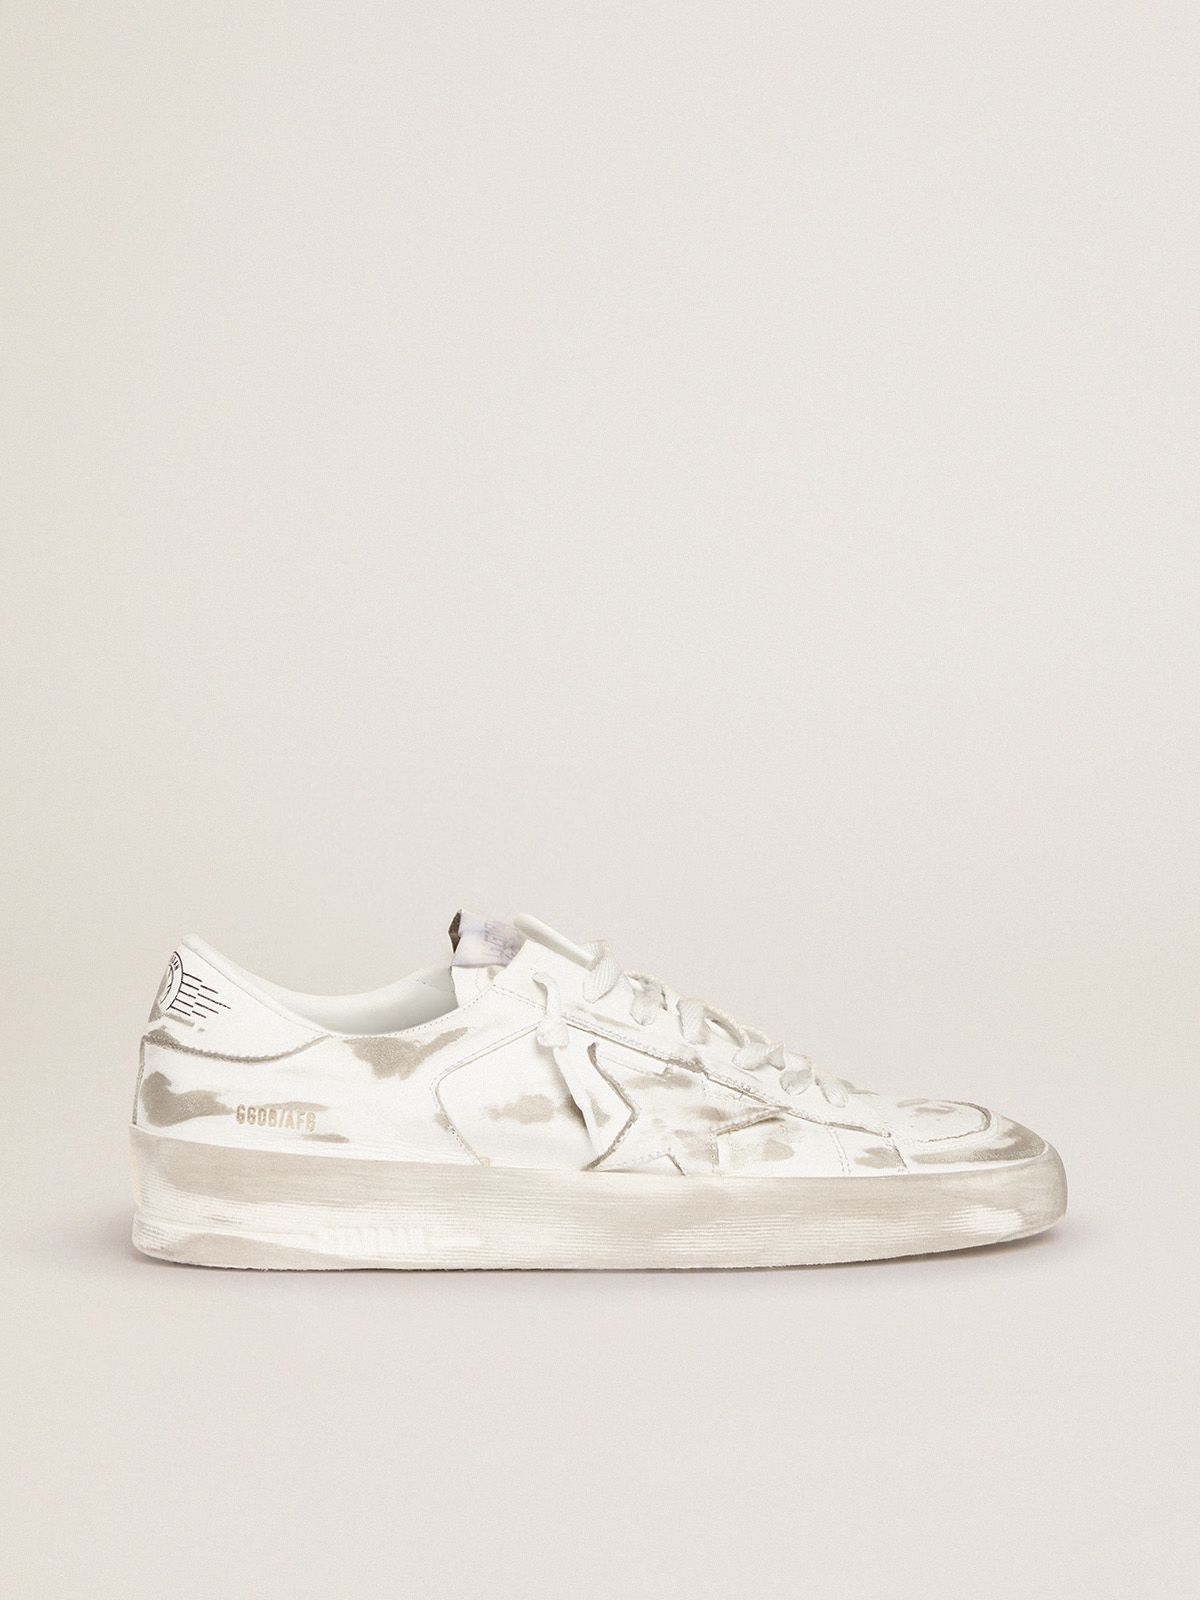 Stardan sneakers in white leather with lived-in treatment | 